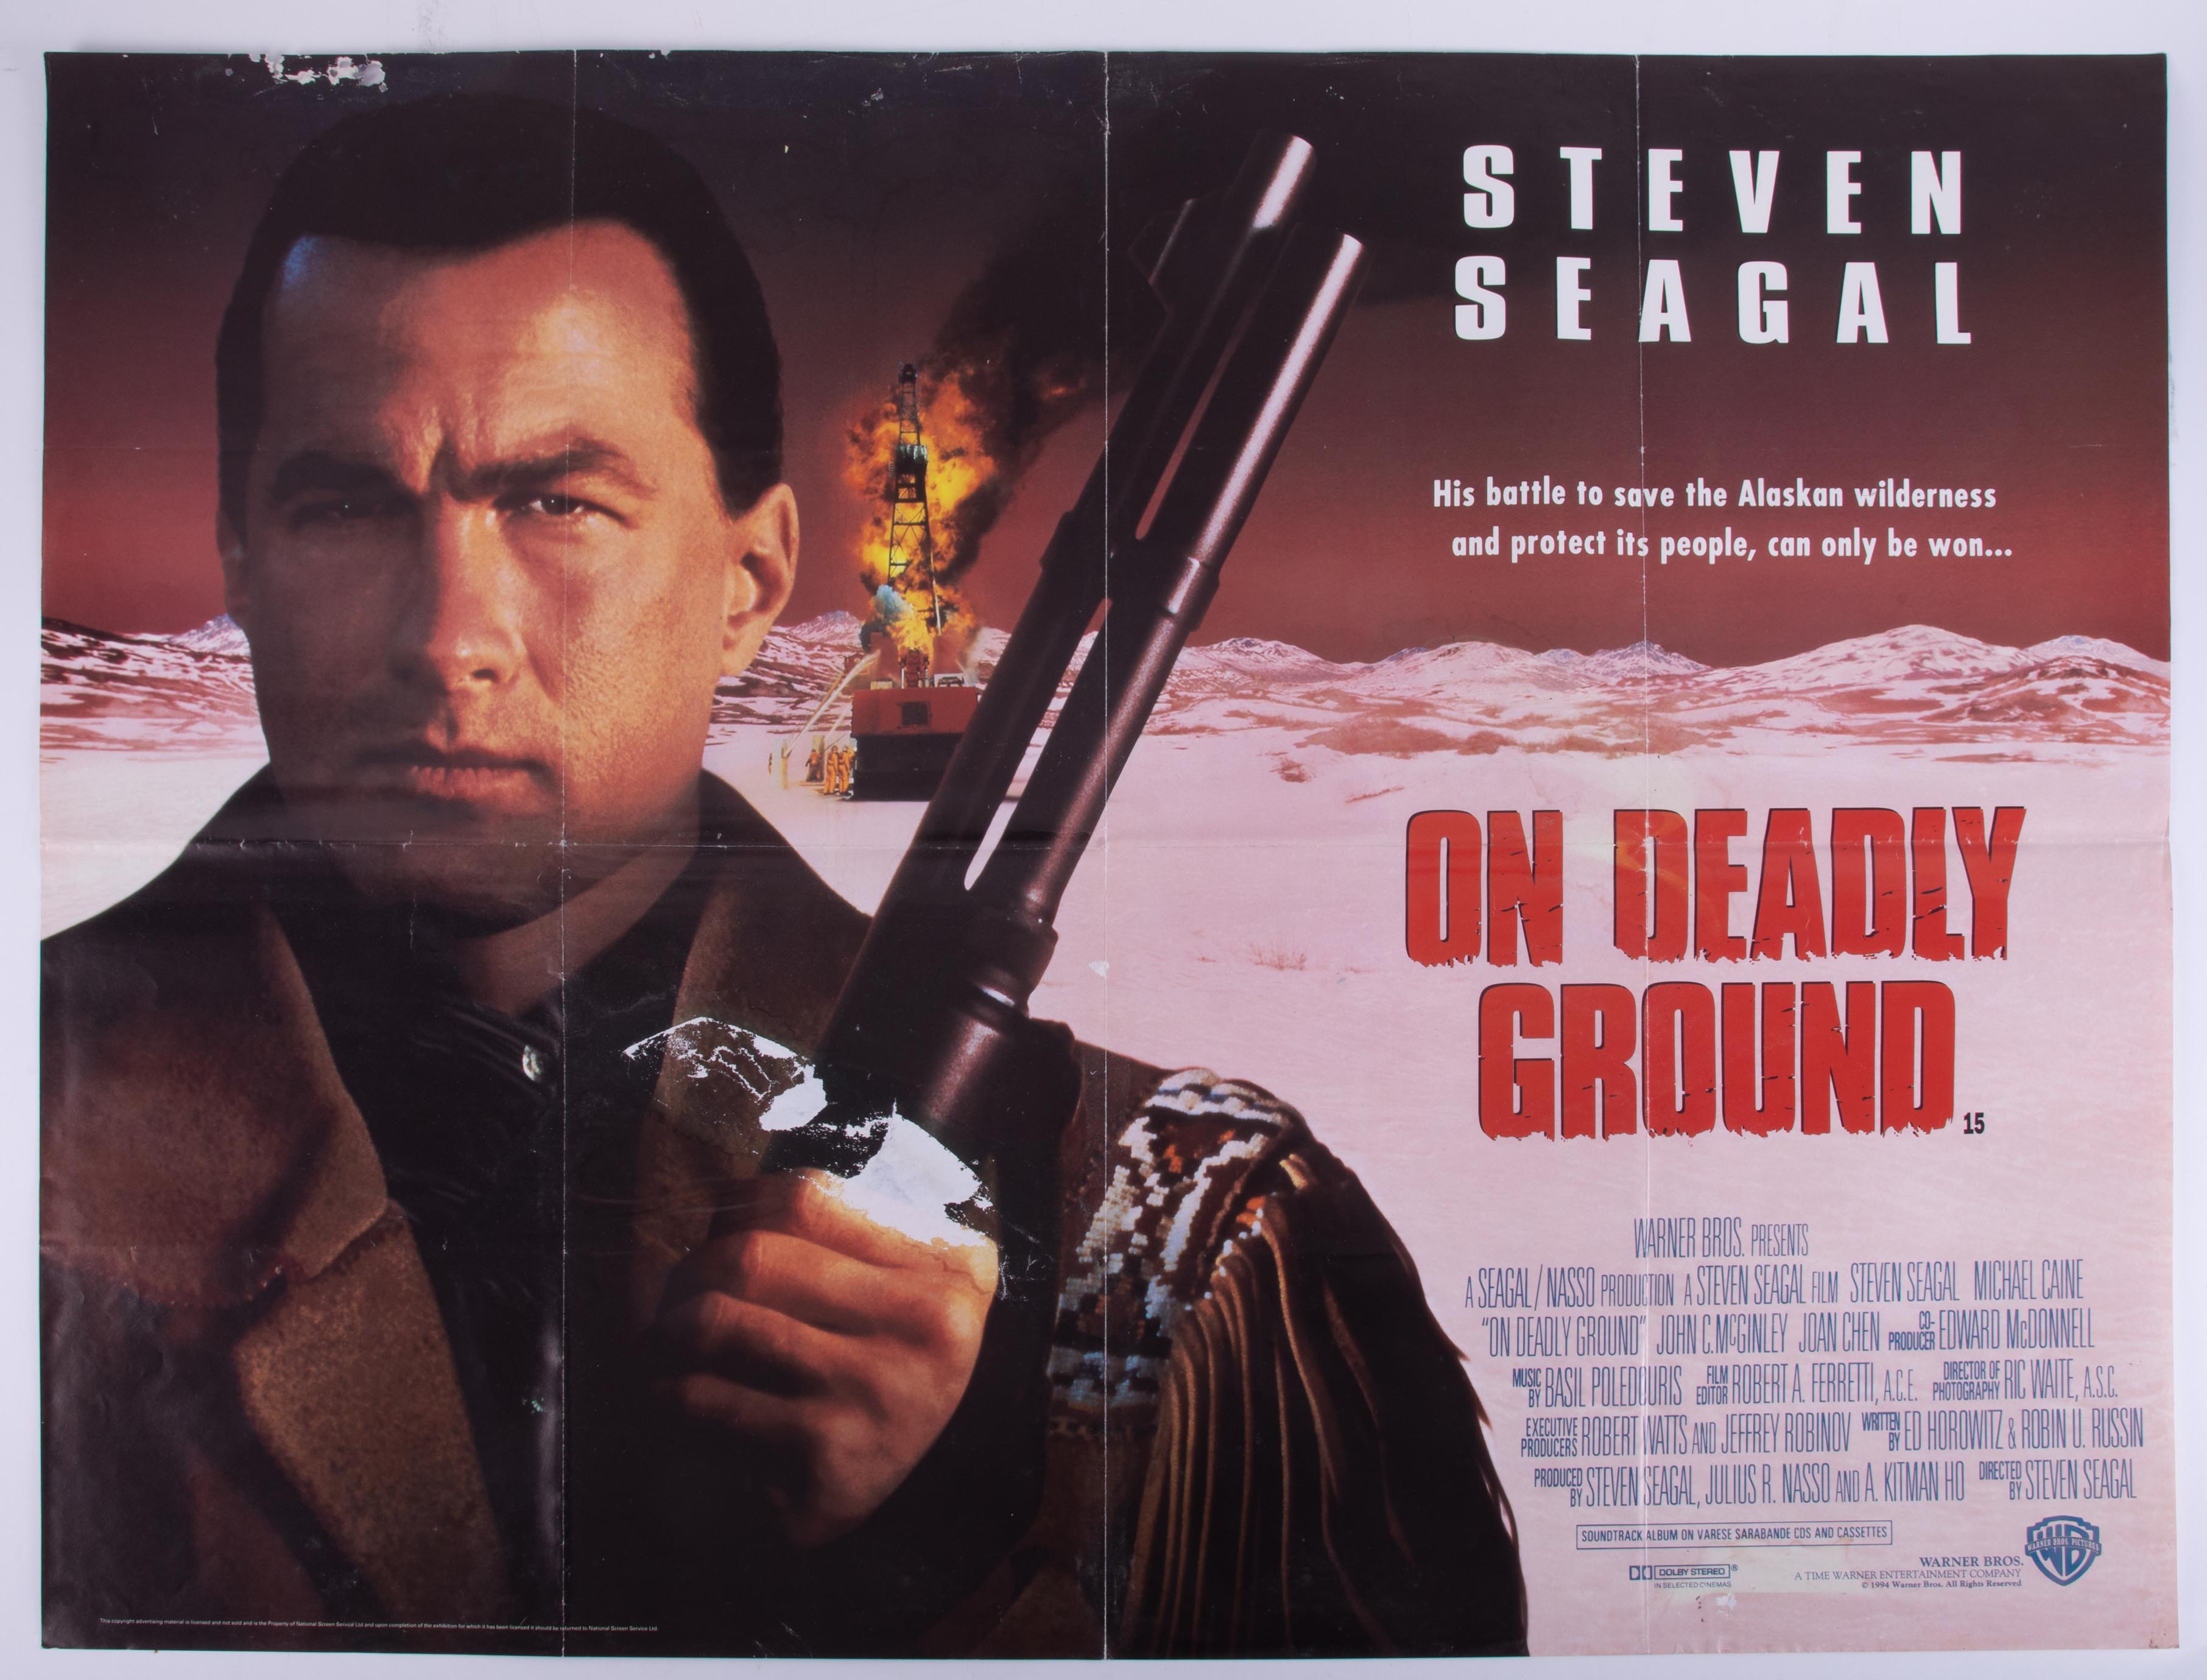 Cinema Poster for the film 'On deadly ground' featuring Steven Seagal (tape marks). Provenance: